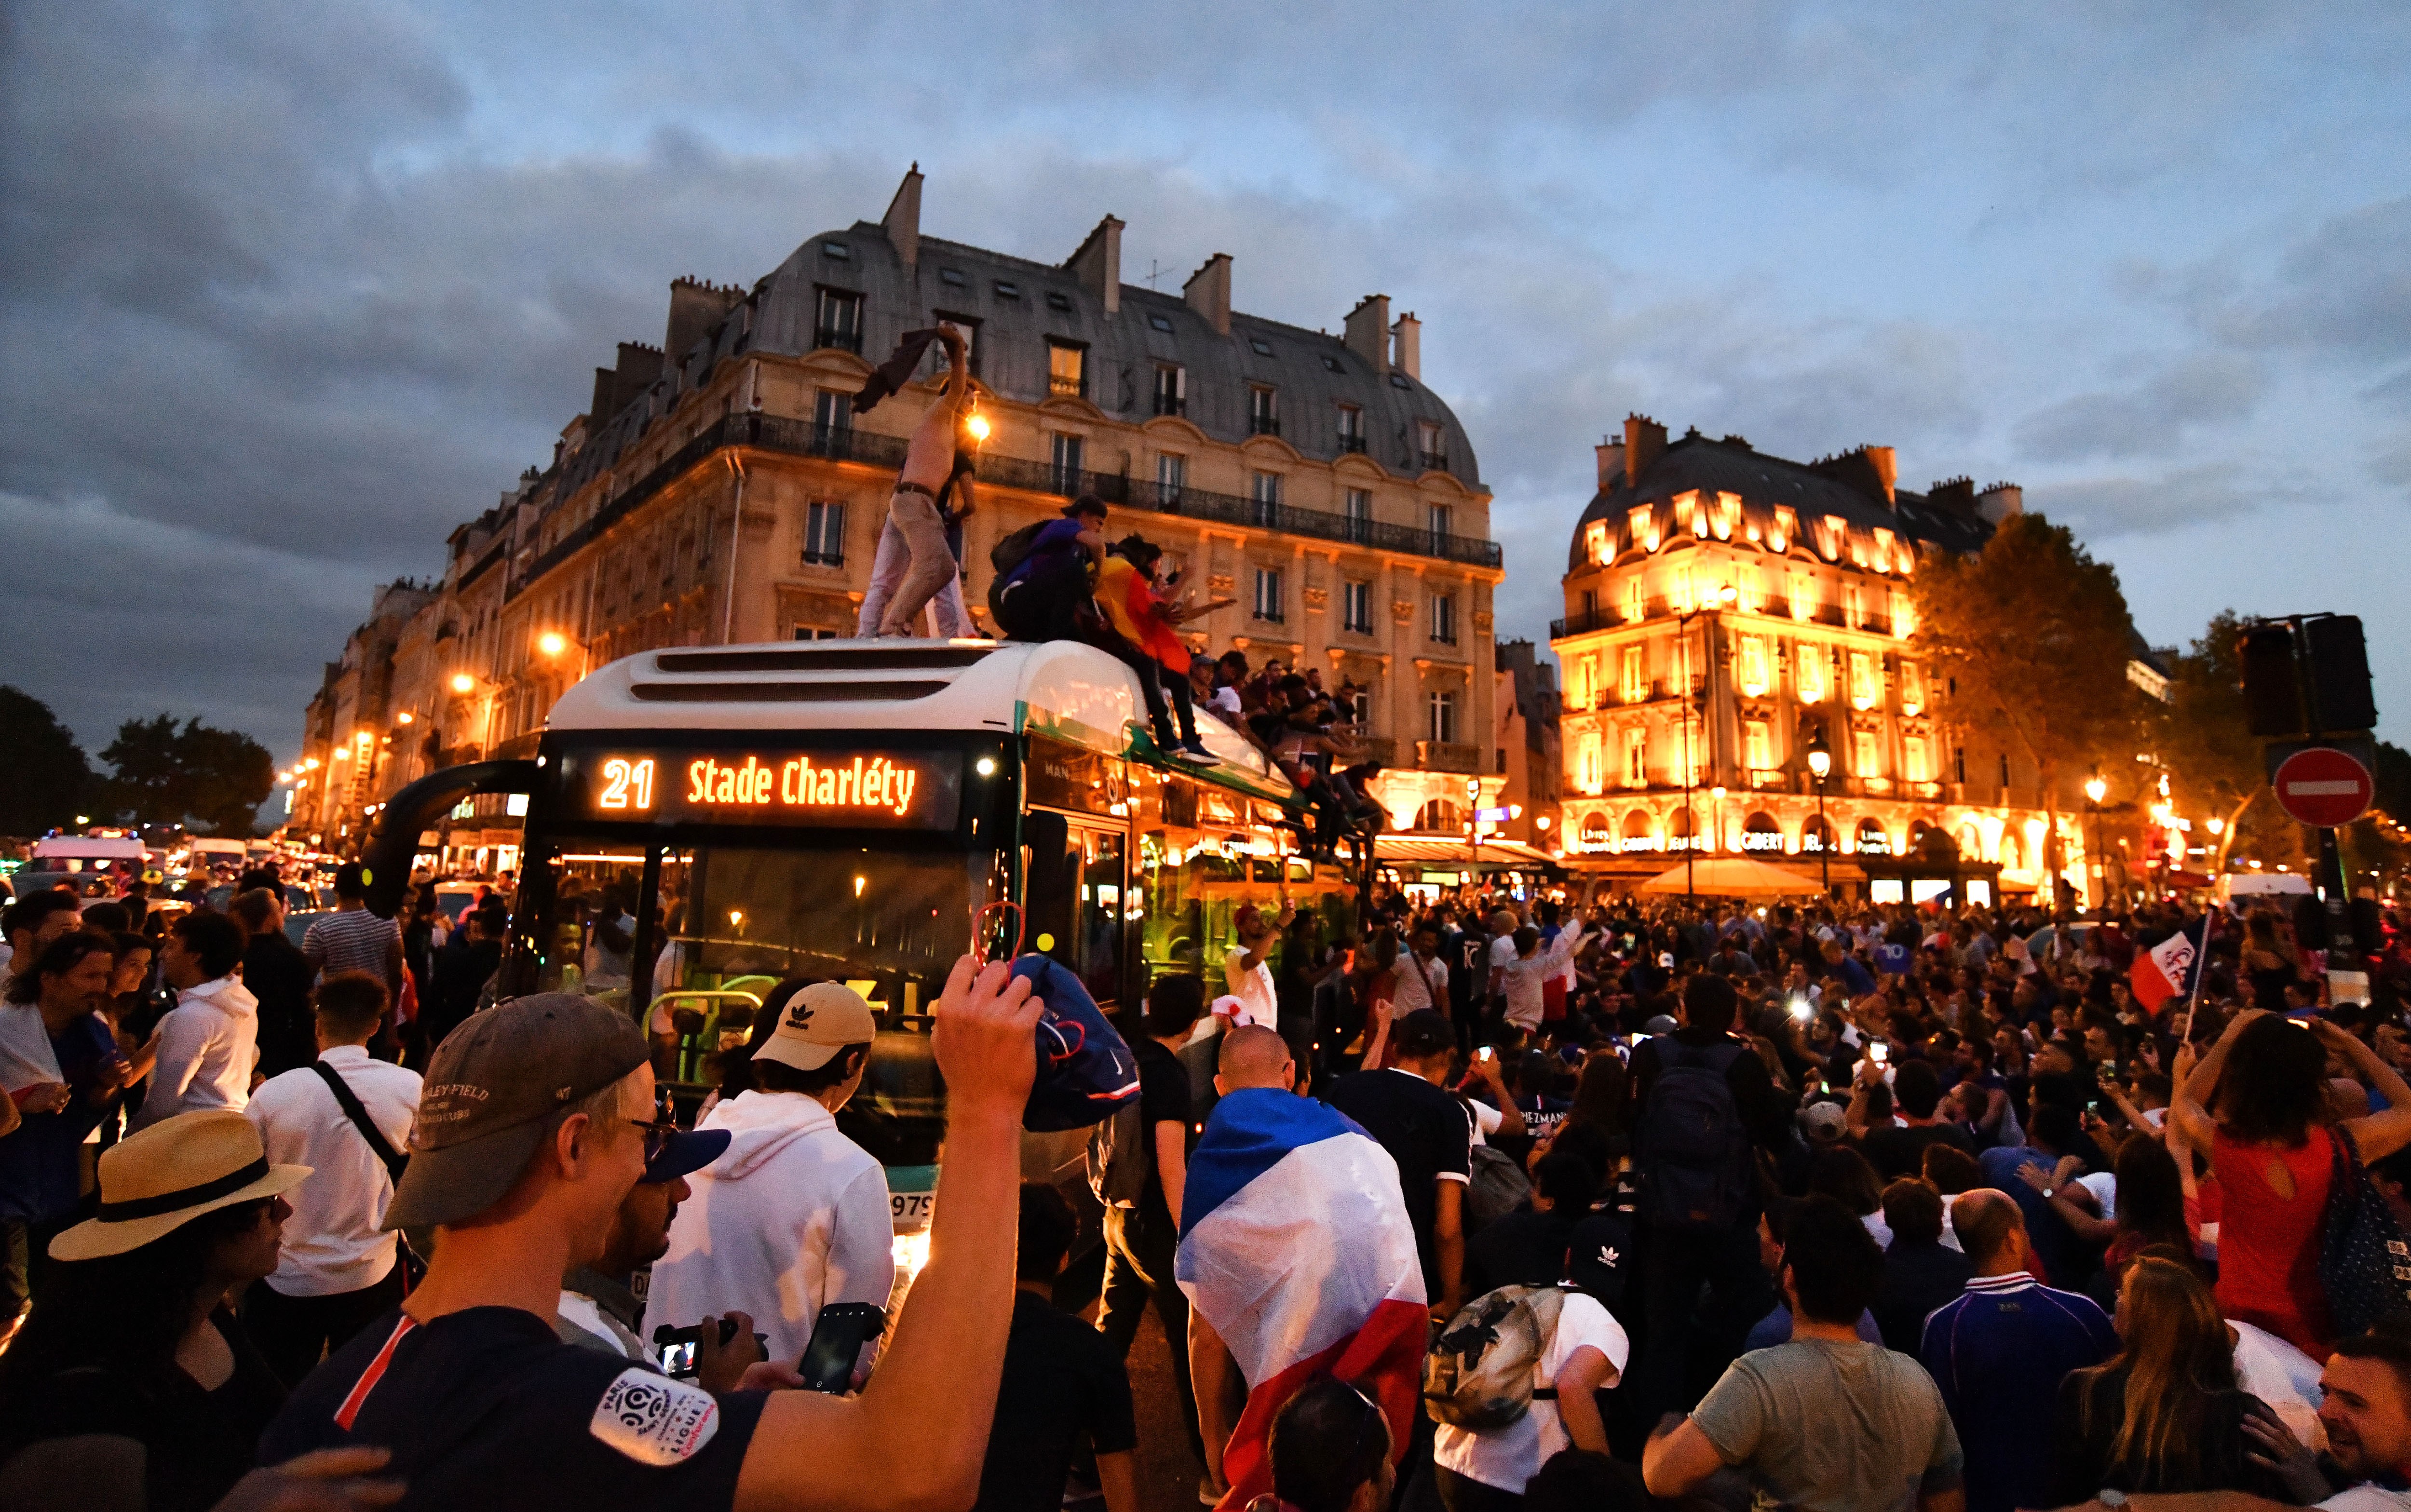 PARIS, FRANCE - JULY 10: Supporters of France football national team celebrate their team's victory against Belgium of the semifinal match in the FIFA 2018 World Cup in front of the Hotel de Ville in Paris, France on July 10, 2018. (Photo by Mustafa Yalcin/Anadolu Agency/Getty Images)